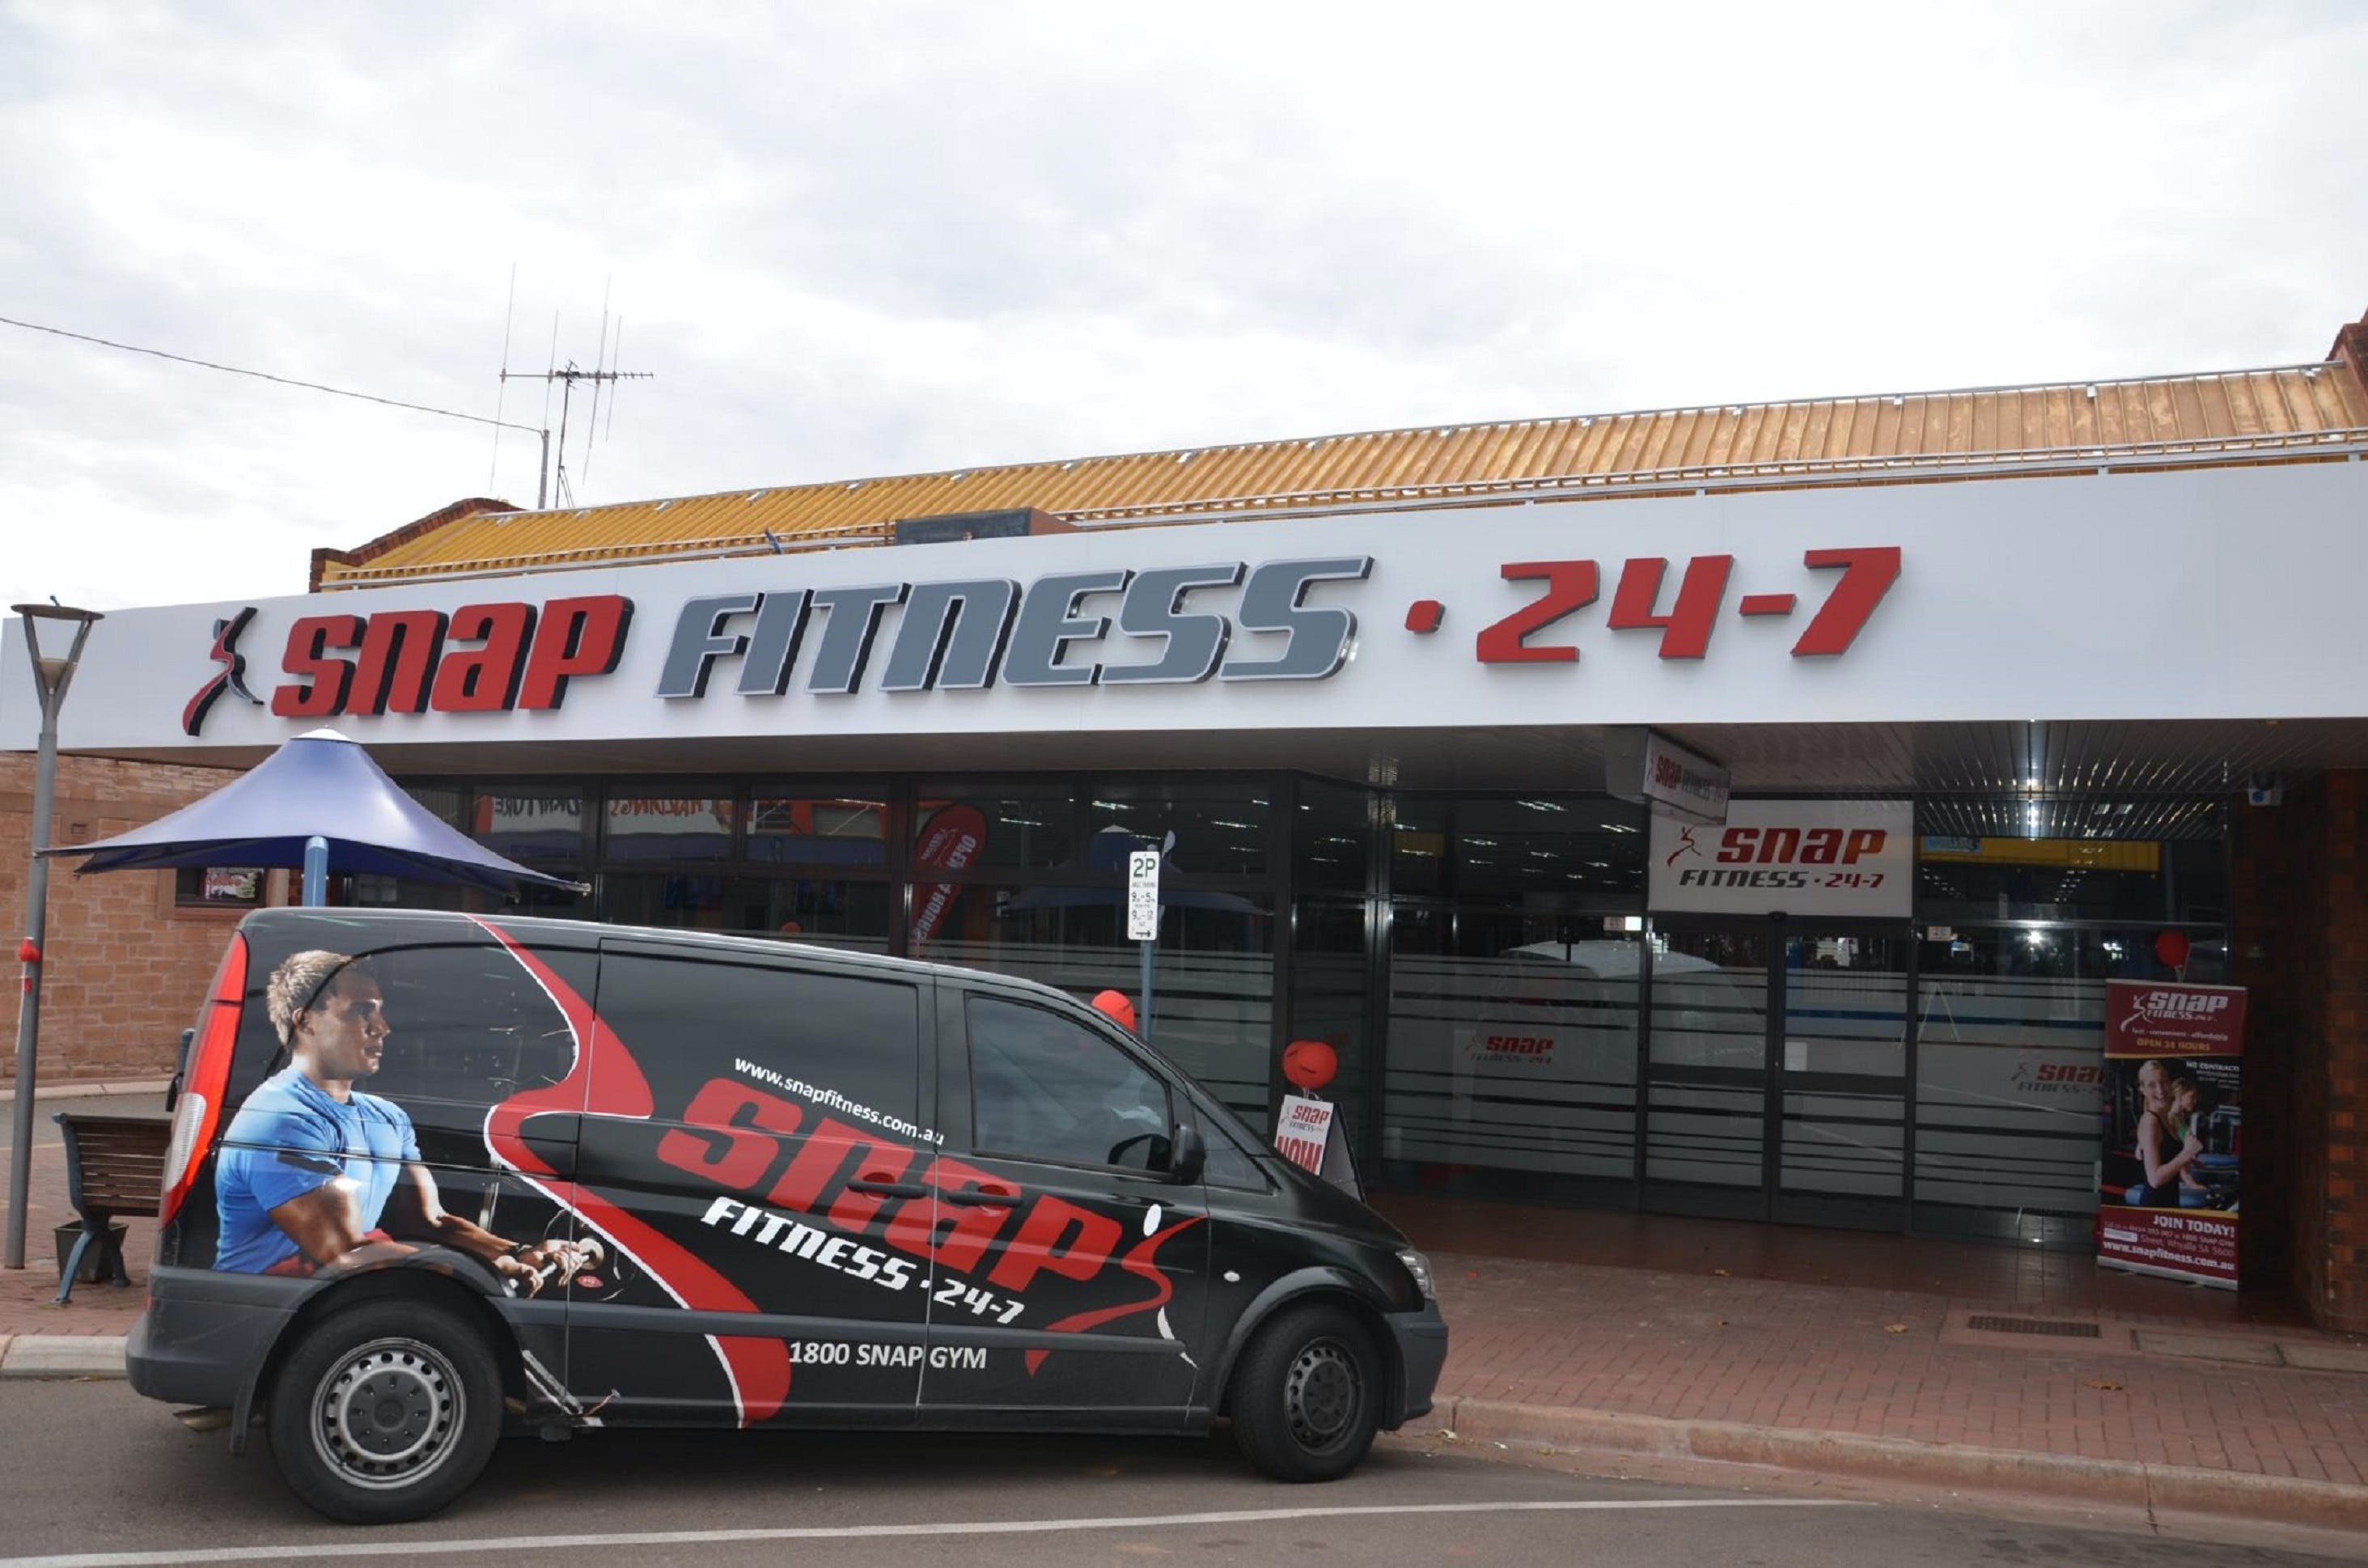 Snap Fitness Whyalla 24/7 gym - Attractions Brisbane